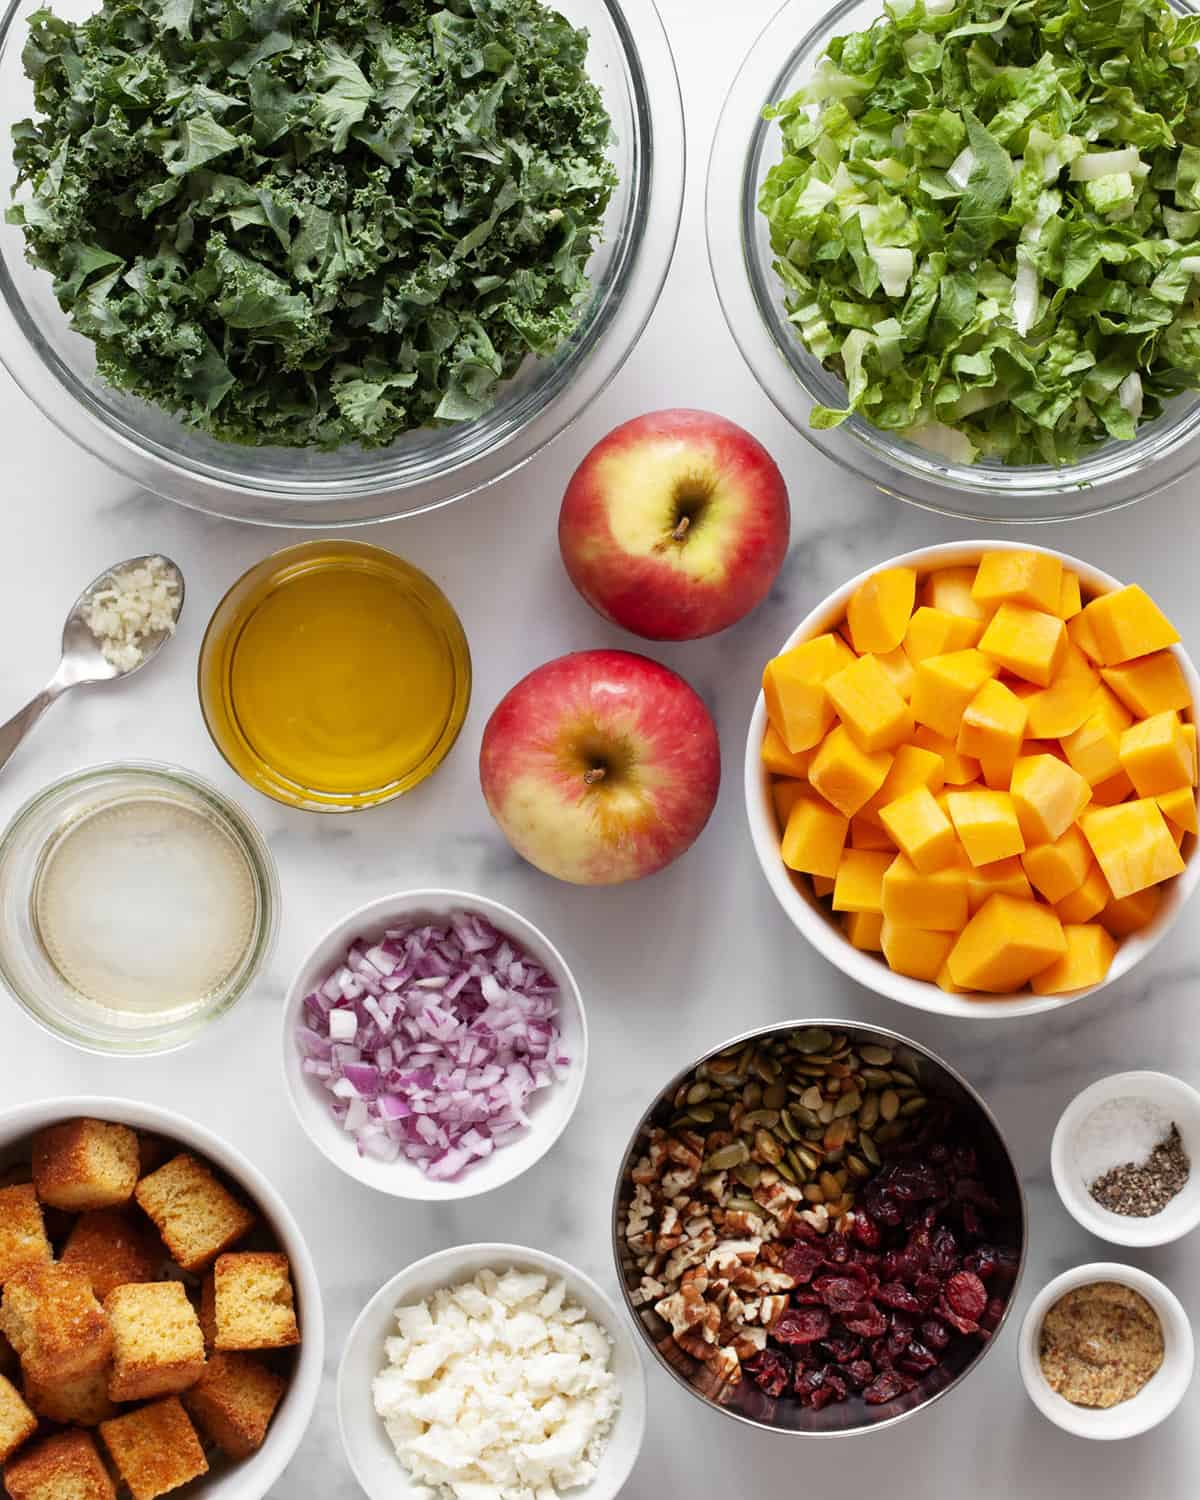 Ingredients including kale, romaine, butternut squash, apples, pecans, goat cheese, apple cider vinegar and olive oil.